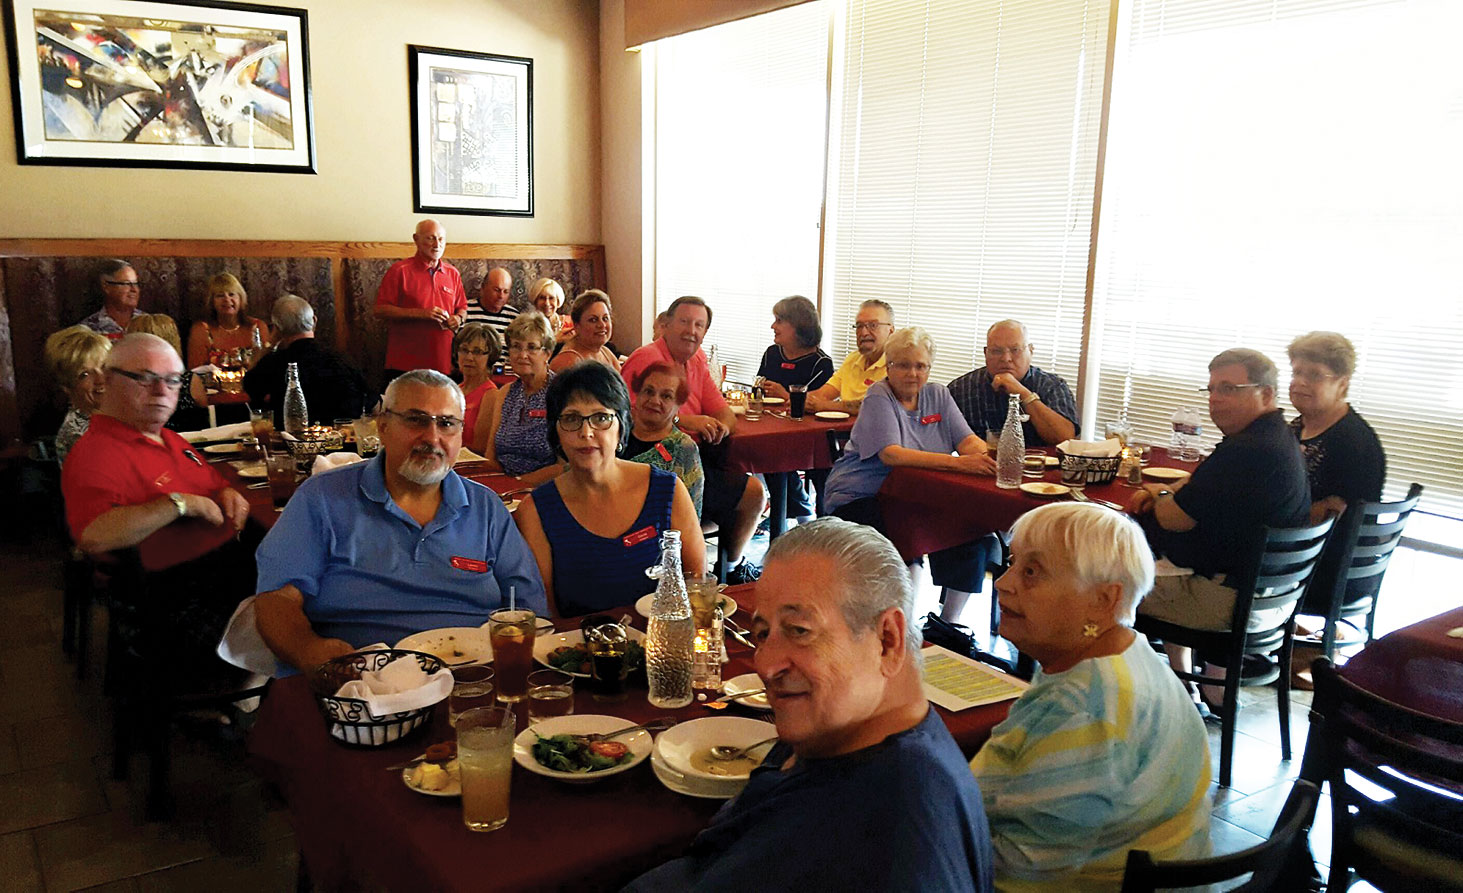 The Italian—American Club had their August luncheon meeting at the Bella Luna Italian Restaurante on Saturday, August 13, 2016. Hosting the lunch were Joe and Vera Cappiello. The meeting portion was conducted by our able President Ken Minichiello.